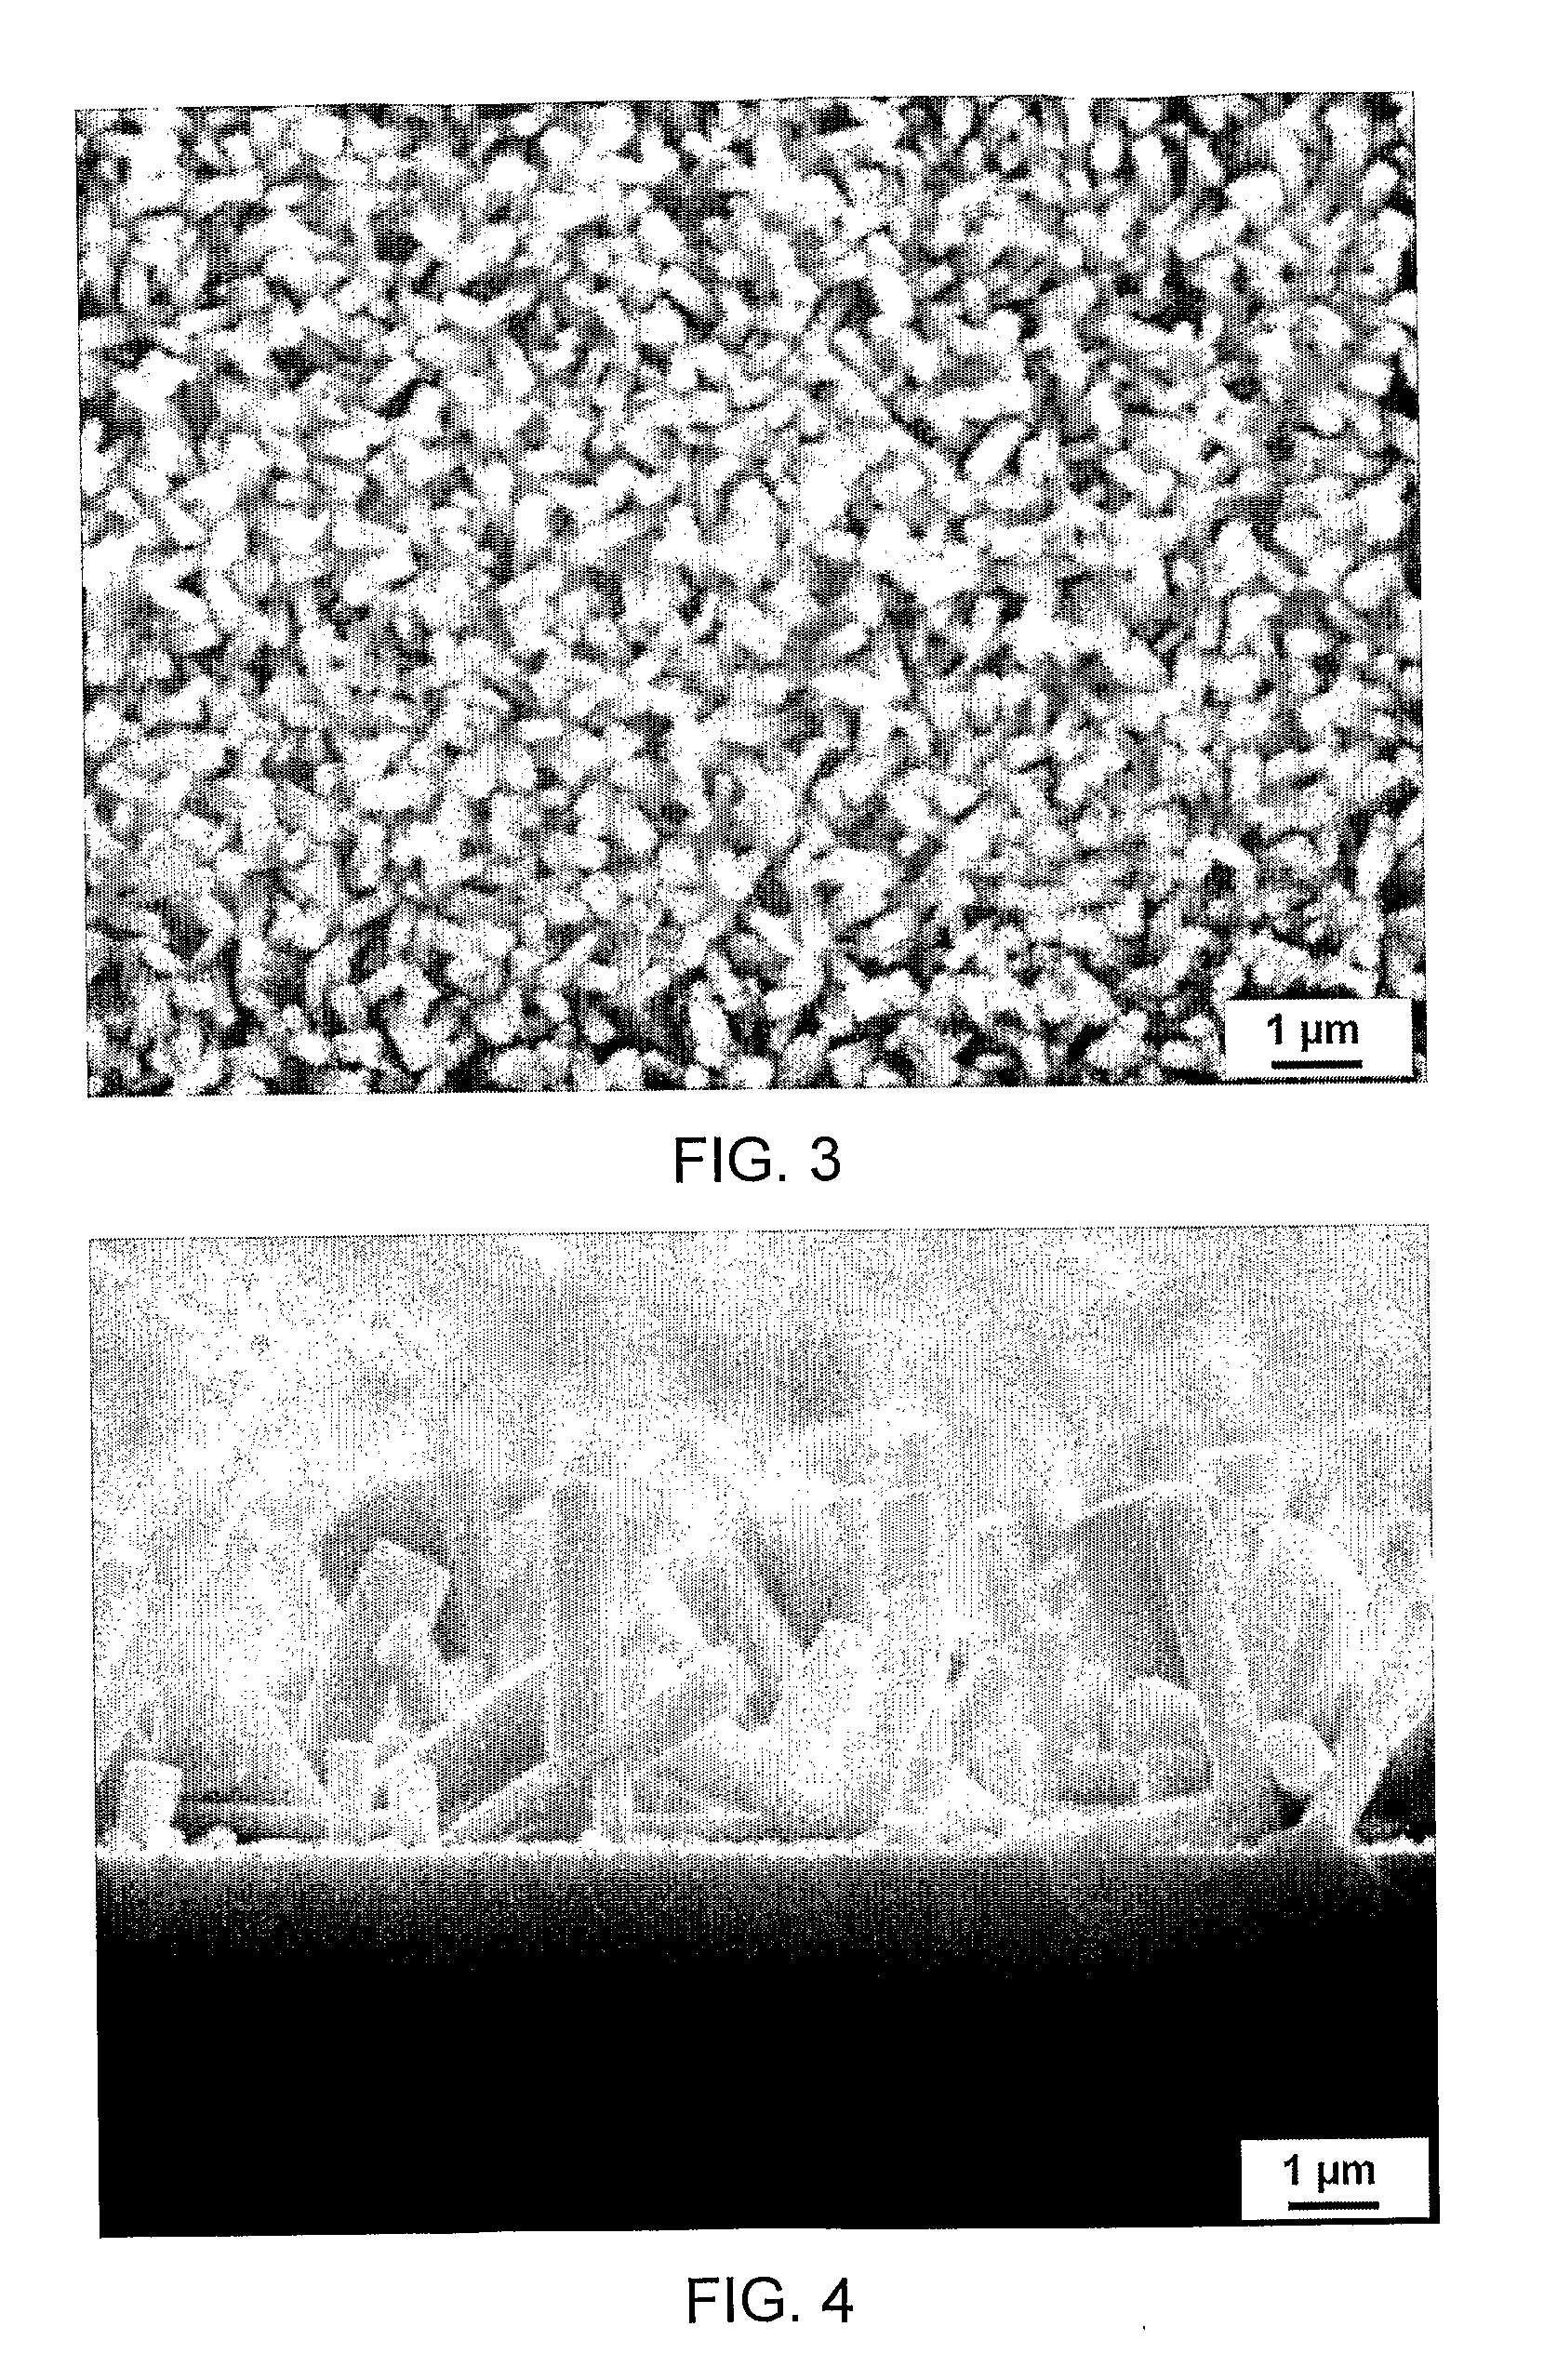 Method of Preparing Zinc Oxide Nanorods on a Substrate By Chemical Spray Pyrolysis